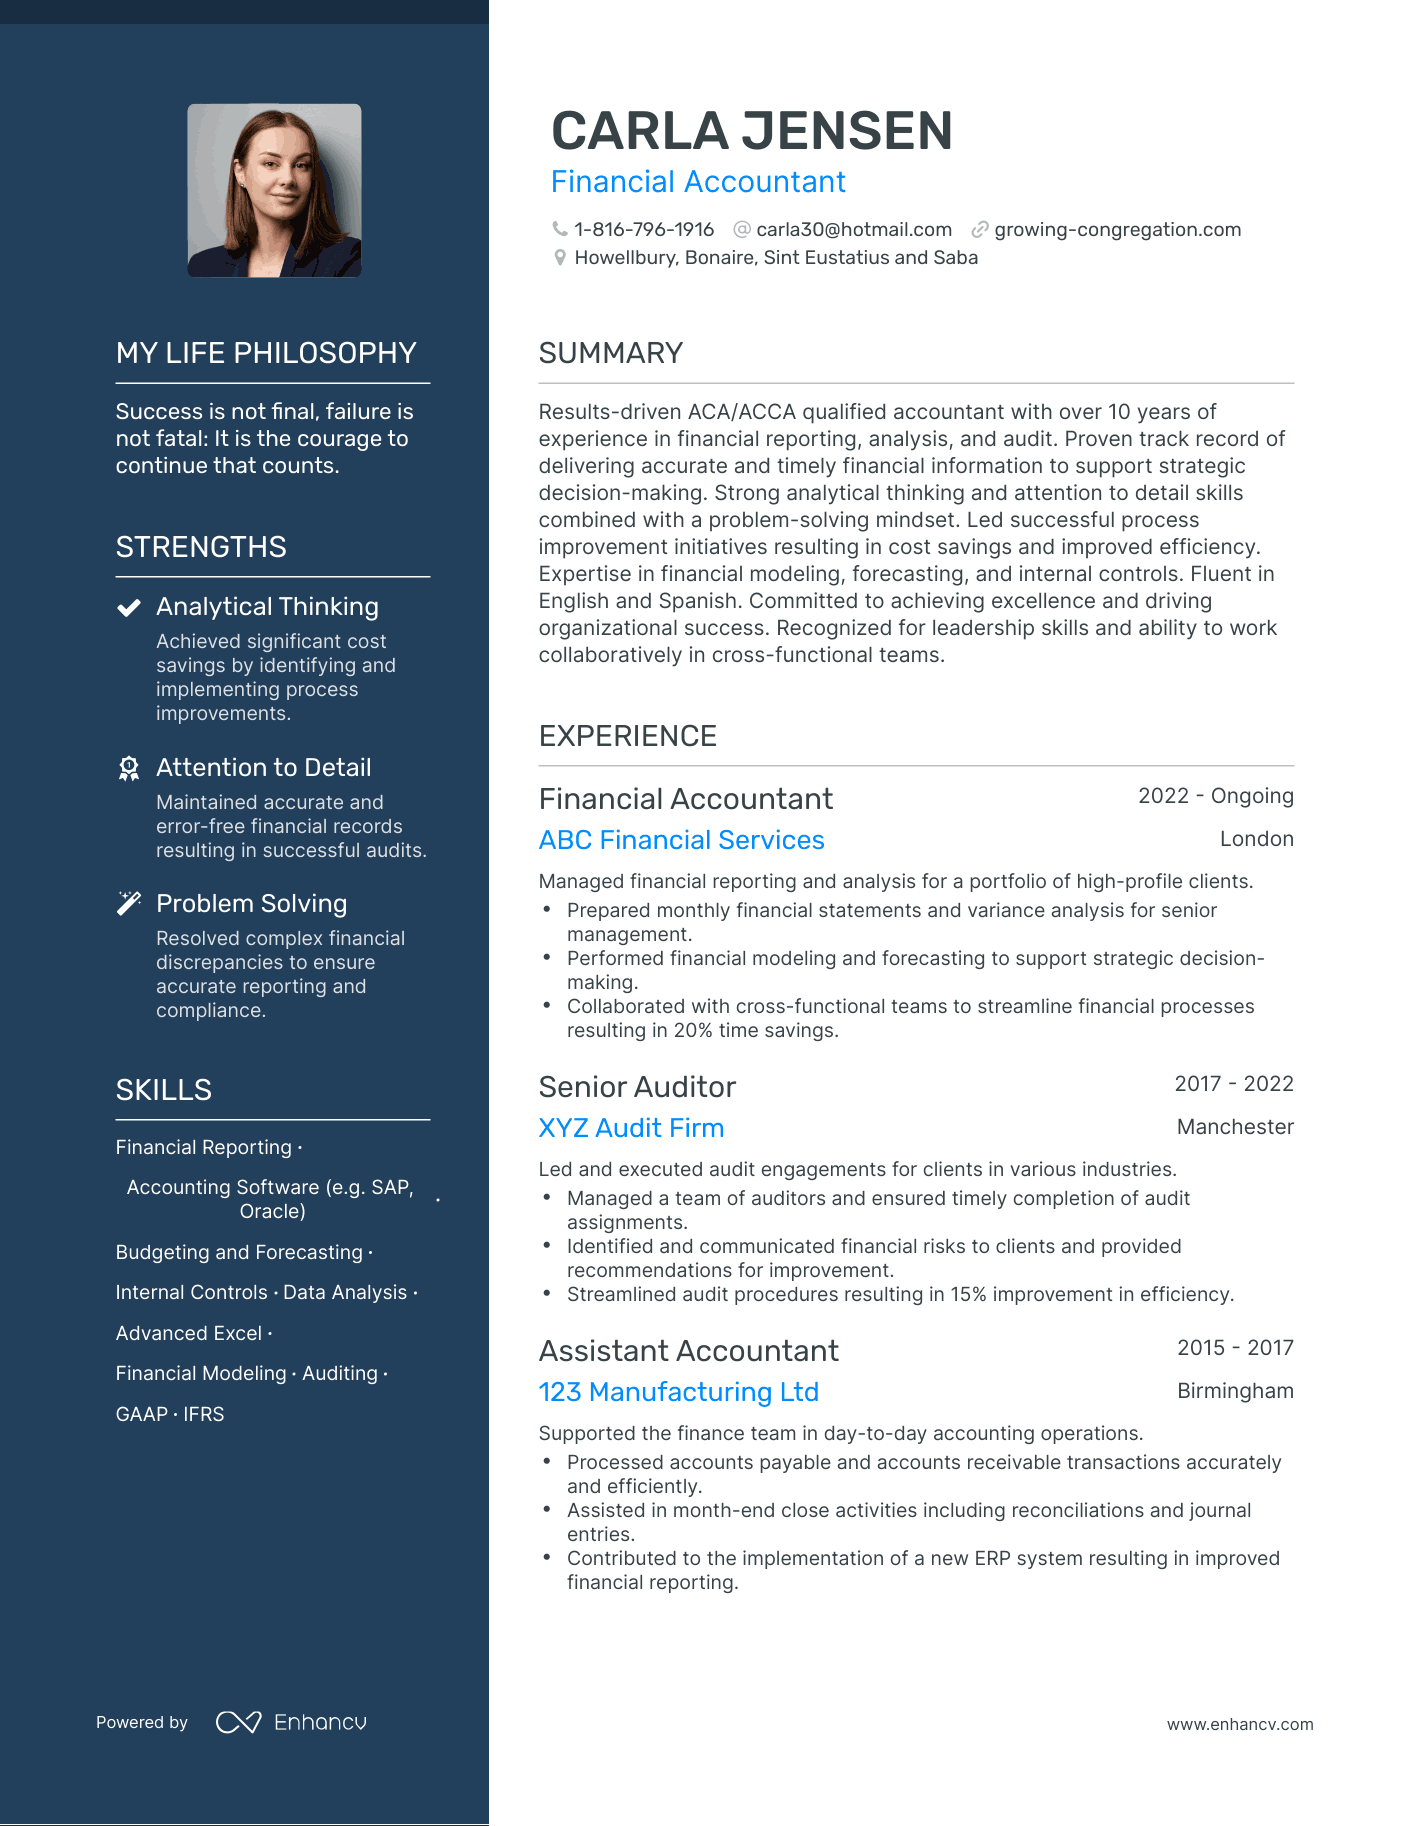 Financial Accountant resume example